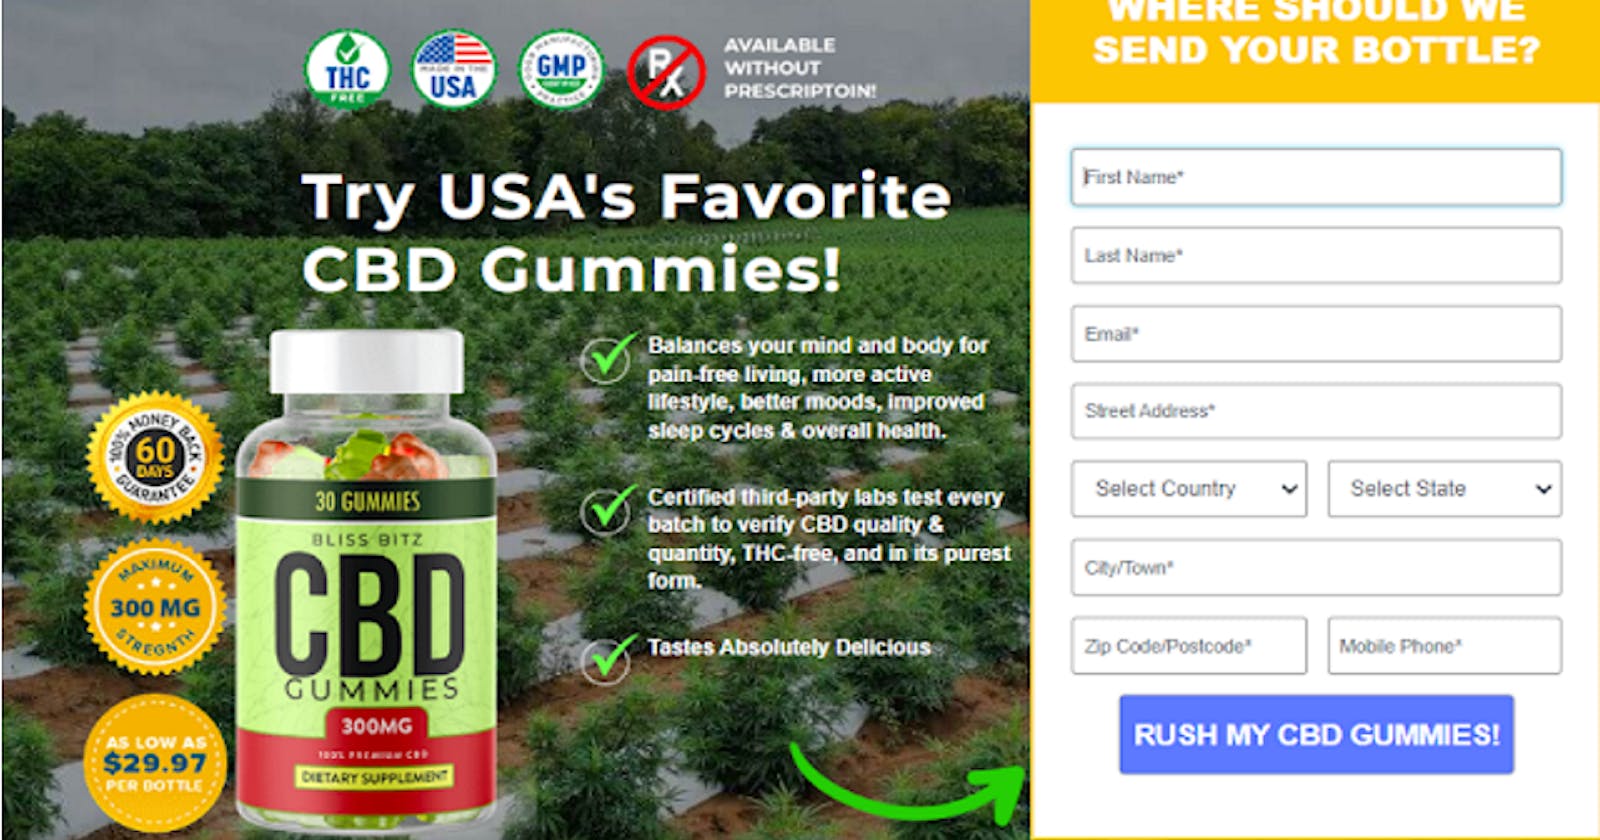 Bliss Blitz CBD Gummies Review, Price, Amazon, Side Effects, Official Website, For Sale, USA & Where To buy?